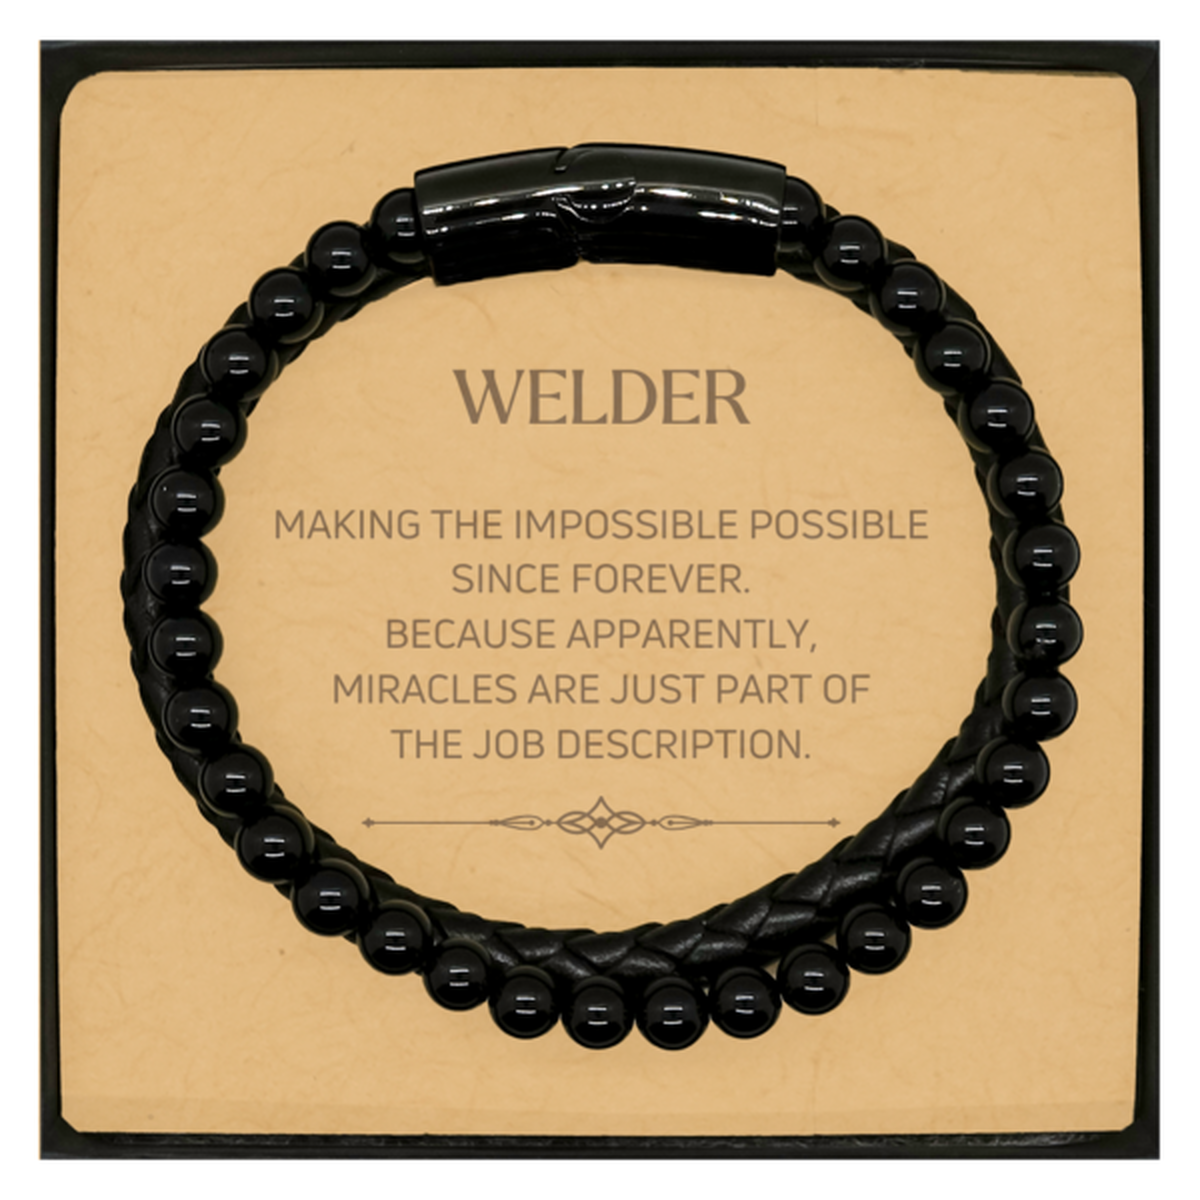 Funny Welder Gifts, Miracles are just part of the job description, Inspirational Birthday Christmas Stone Leather Bracelets For Welder, Men, Women, Coworkers, Friends, Boss